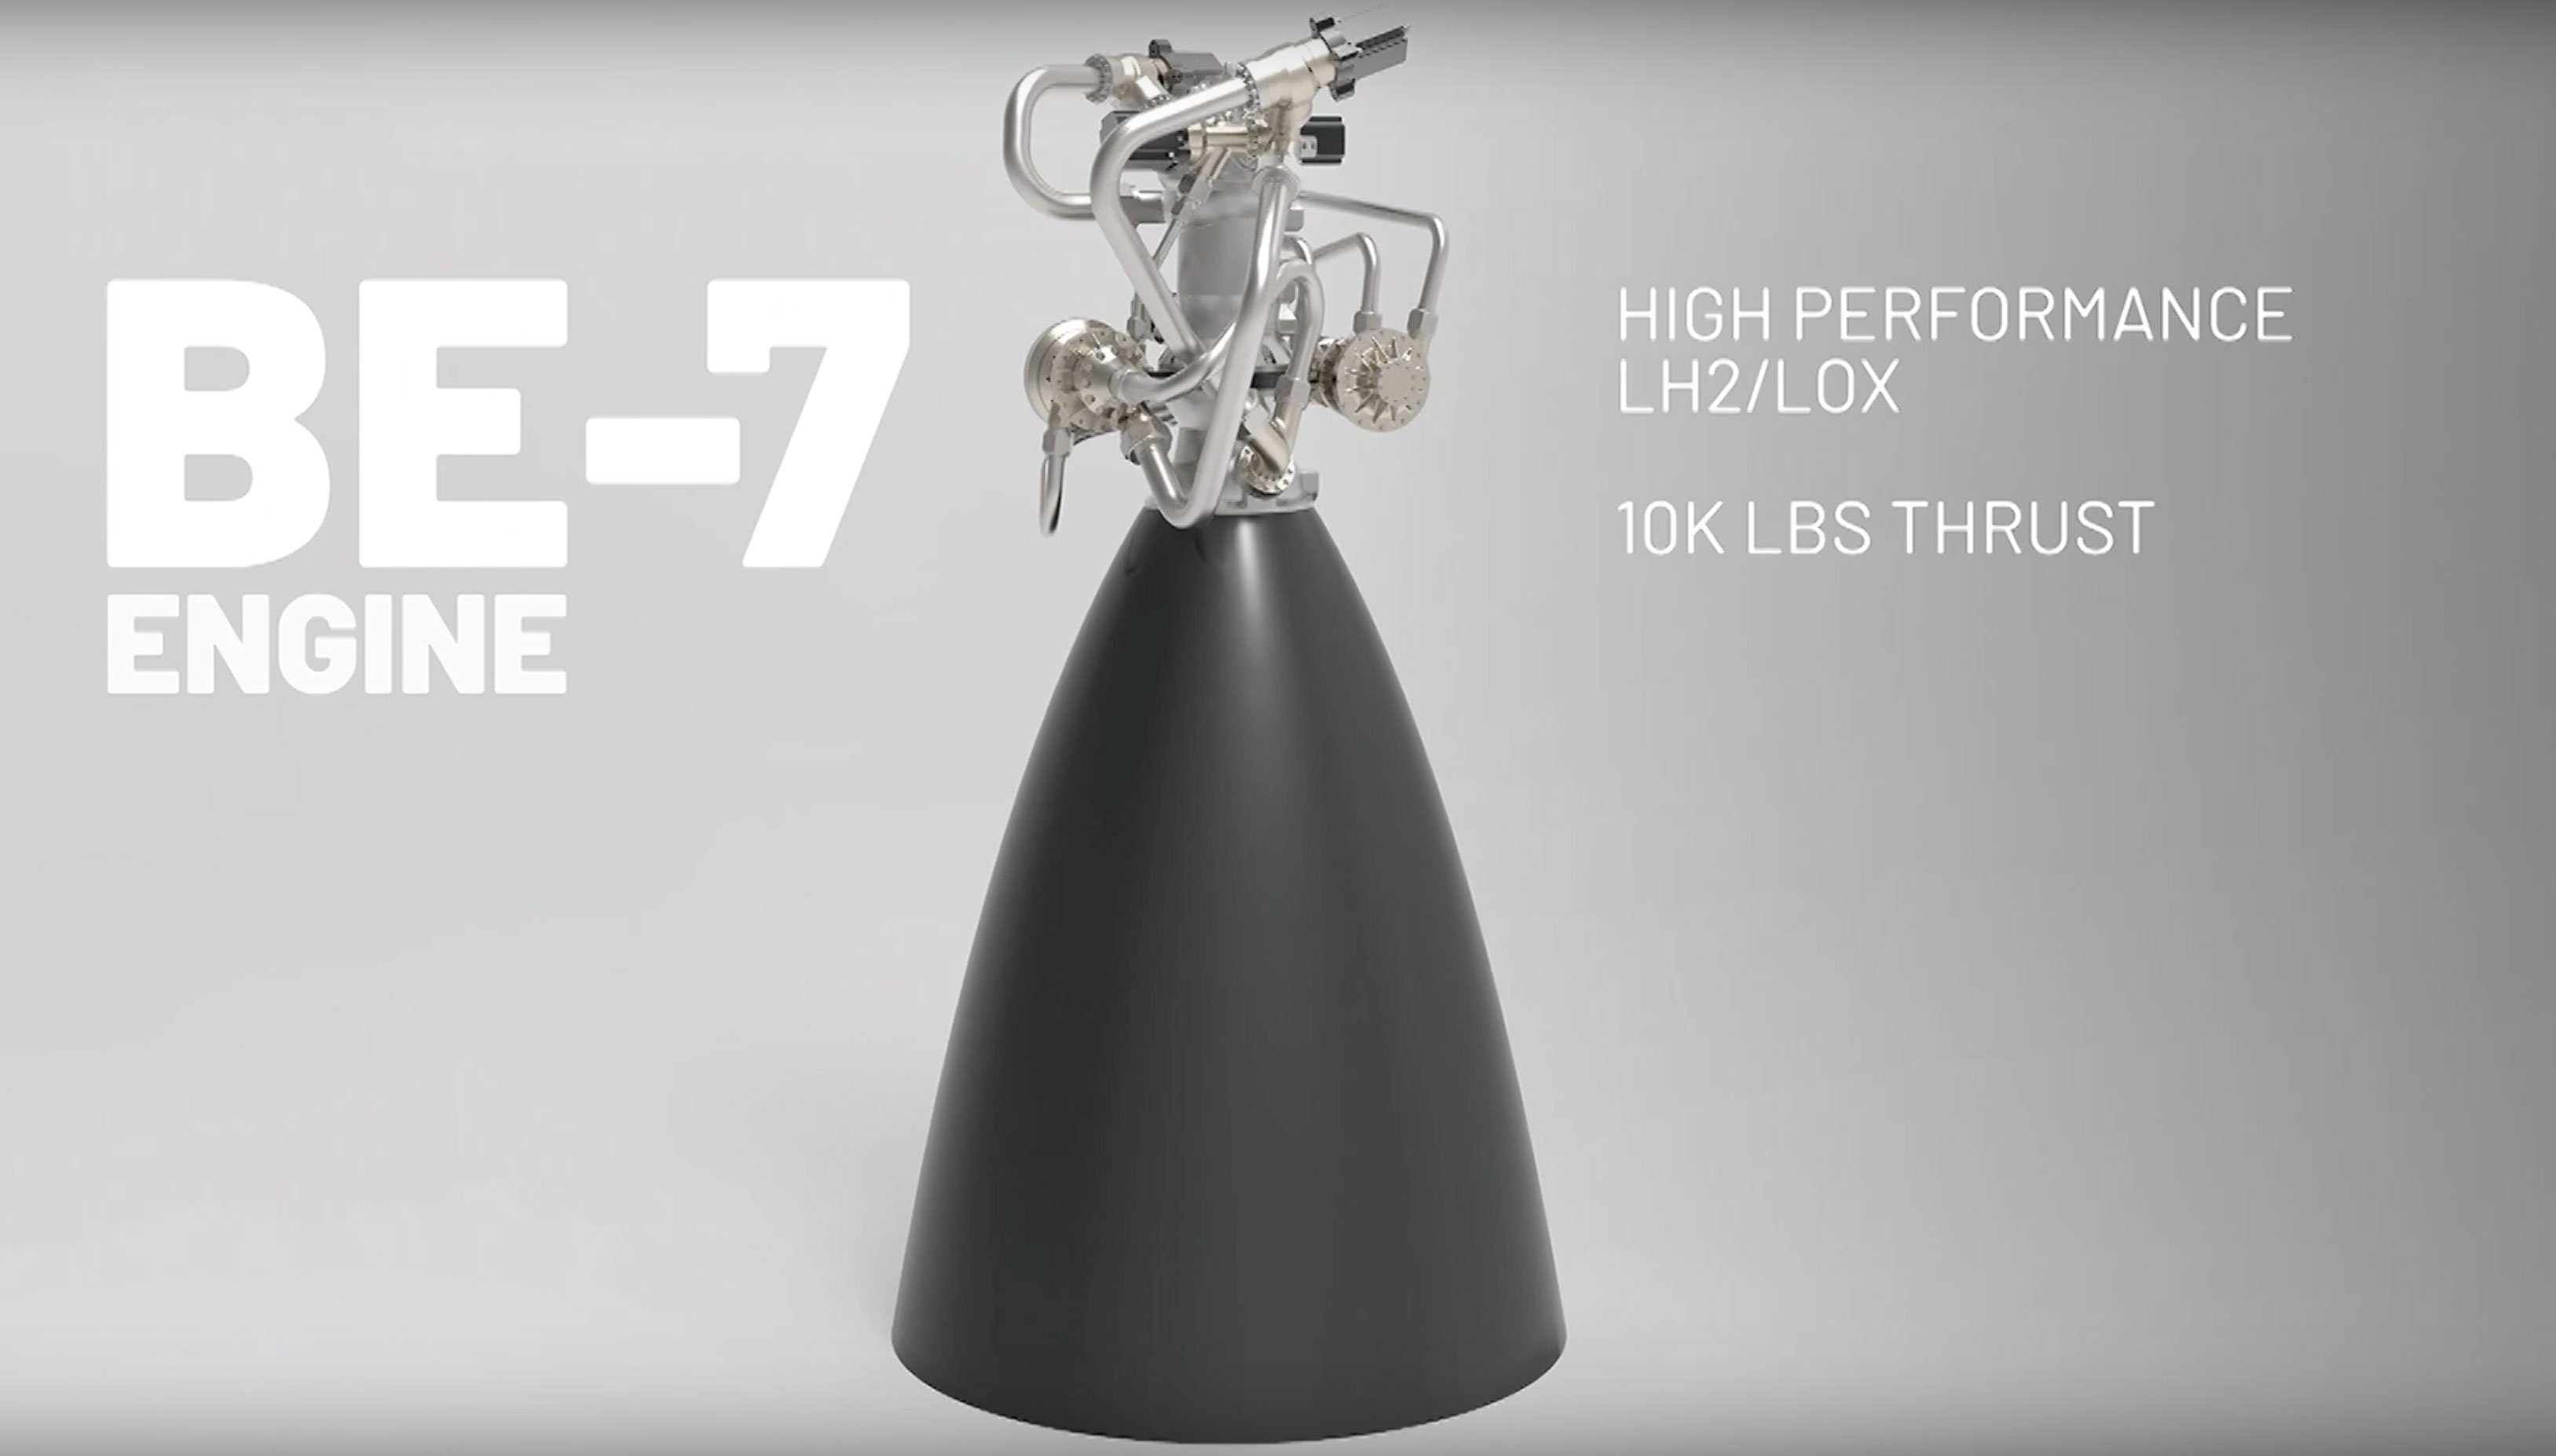 https://www.3dprintingmedia.network/jeff-bezos-presents-new-blue-moon-lunar-lander-with-almost-entirely-3d-printed-be-7-engine/